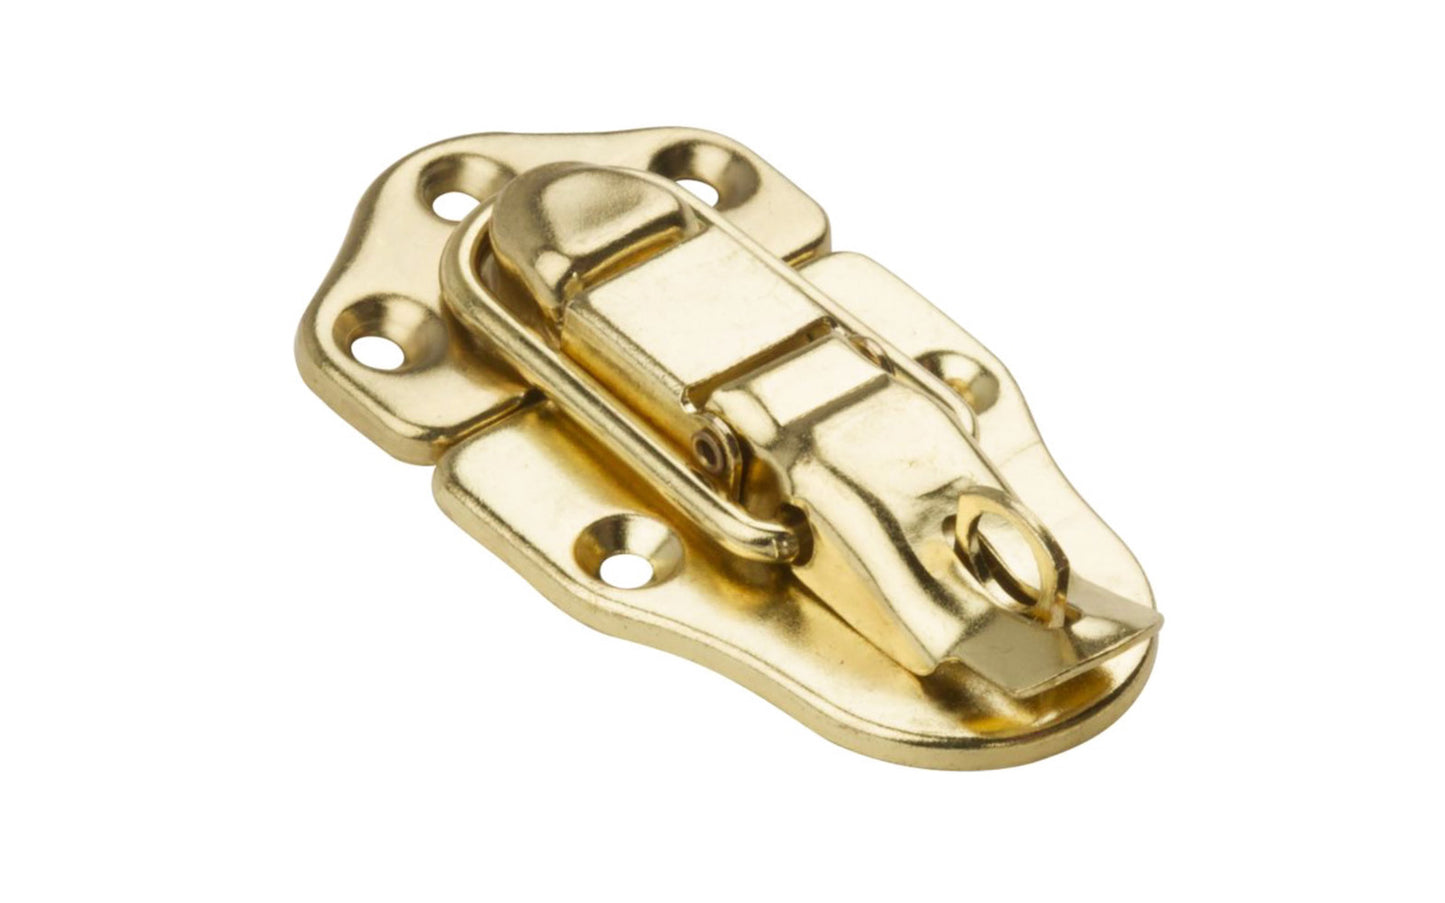 This Brass-Plated Lockable Draw Catch is made of steel material with brass-plated finish. Latch for a tight secure closing. Surface mount. Use to secure trunks, chests, cases, tool boxes, & other items. 1-3/4" wide x 3-1/2" high. National Hardware Model No. N208-603. 038613208605